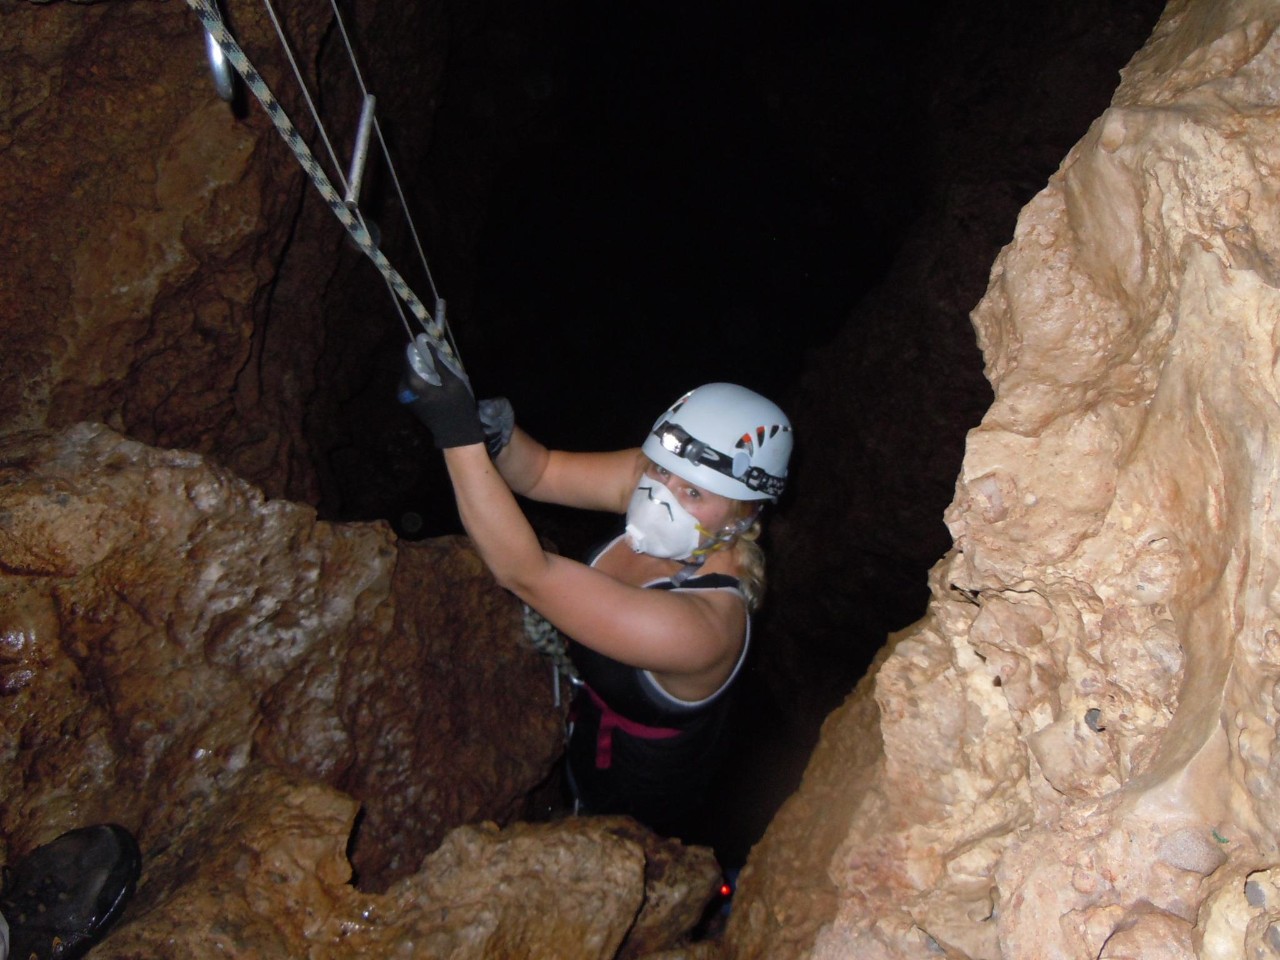 UC biology student Amanda Powers wears a dust mask to protect her lungs from fungal disease while looking for cavefish in a cavern in Sierra del Abra Tanchipa.